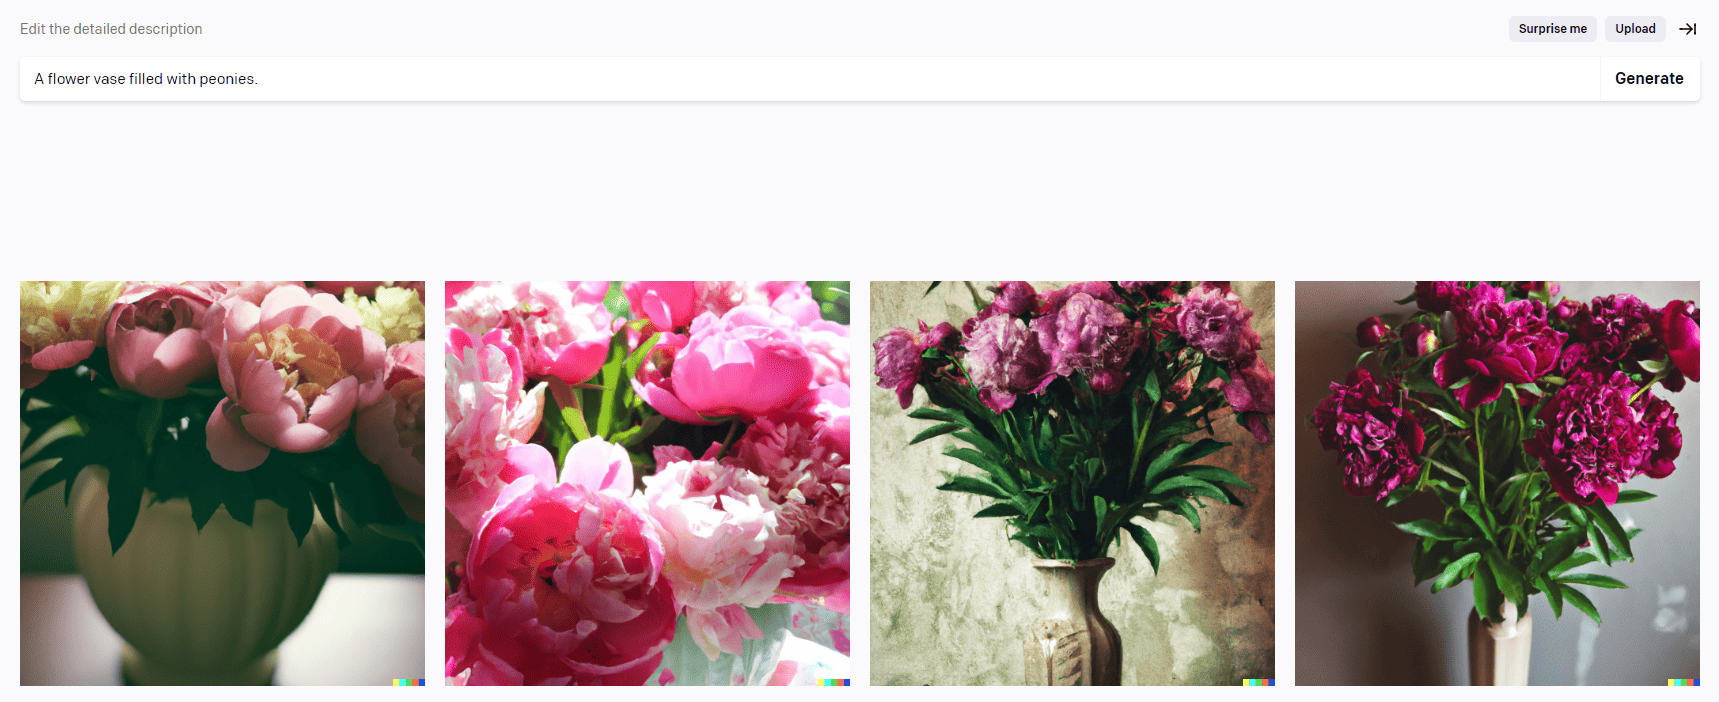 DALL-E 2 Generated Image: A Flower Vase with Peonies